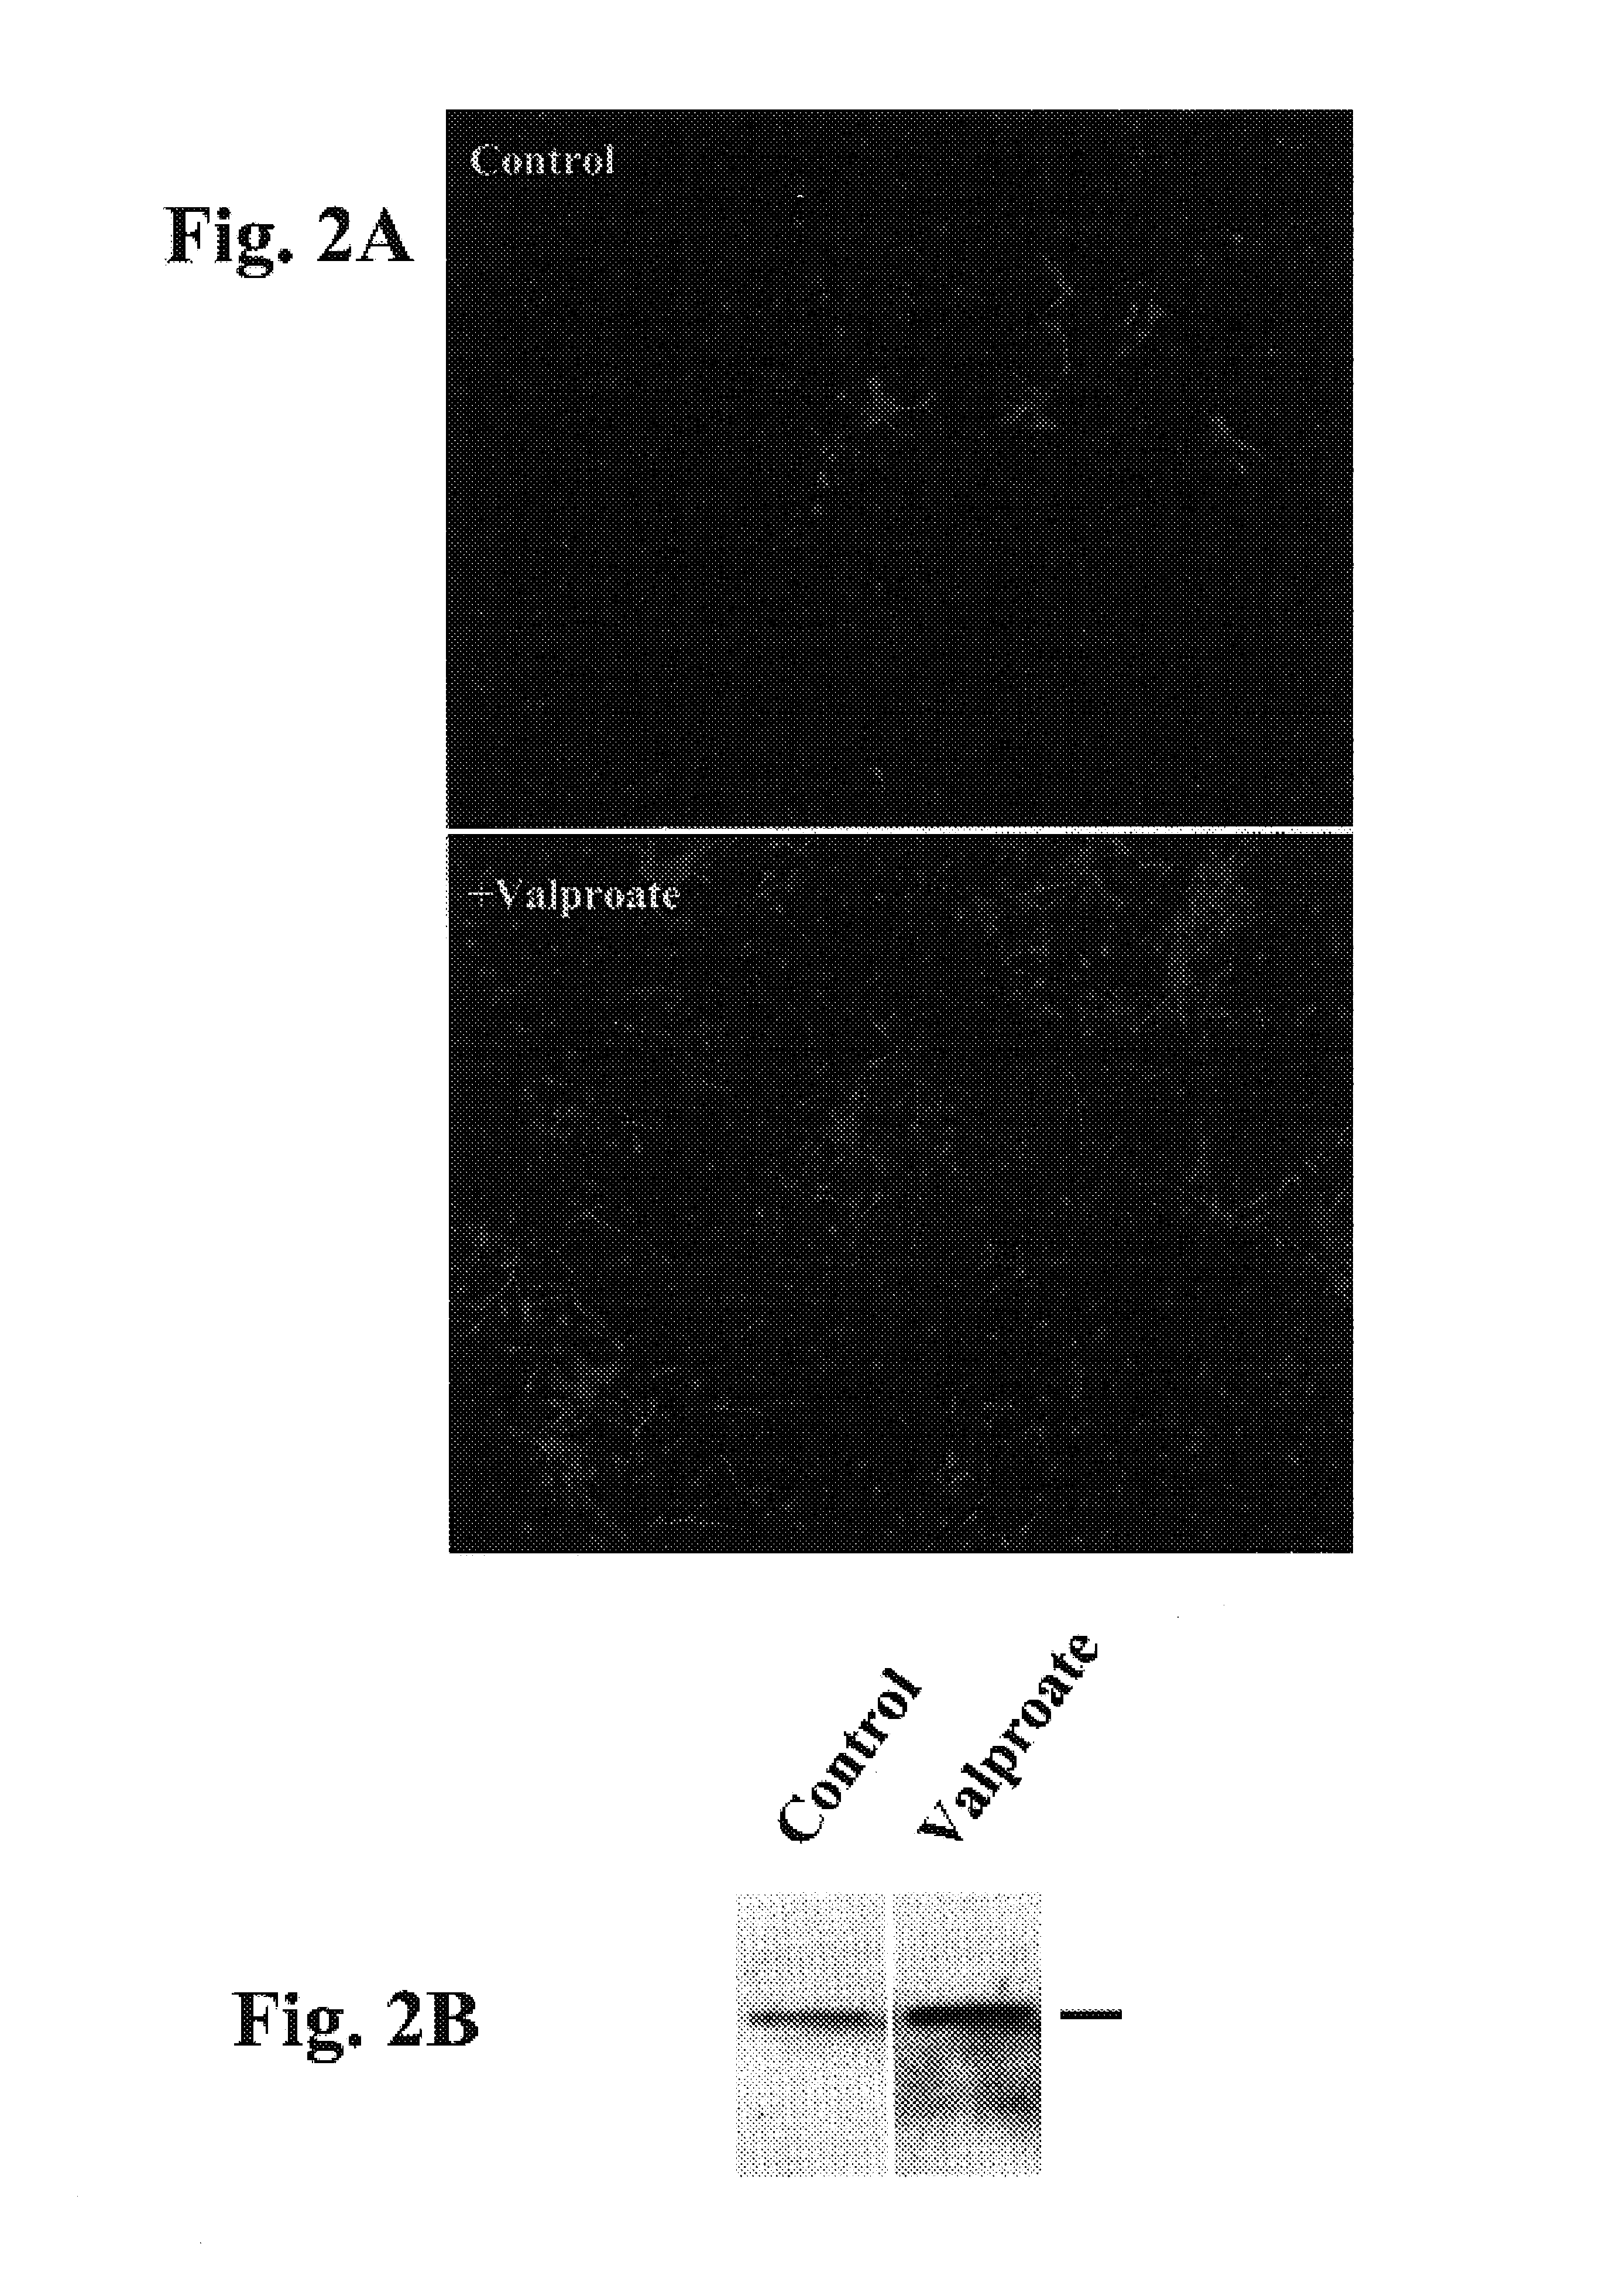 Method for neural stem cell differentiation using valproate